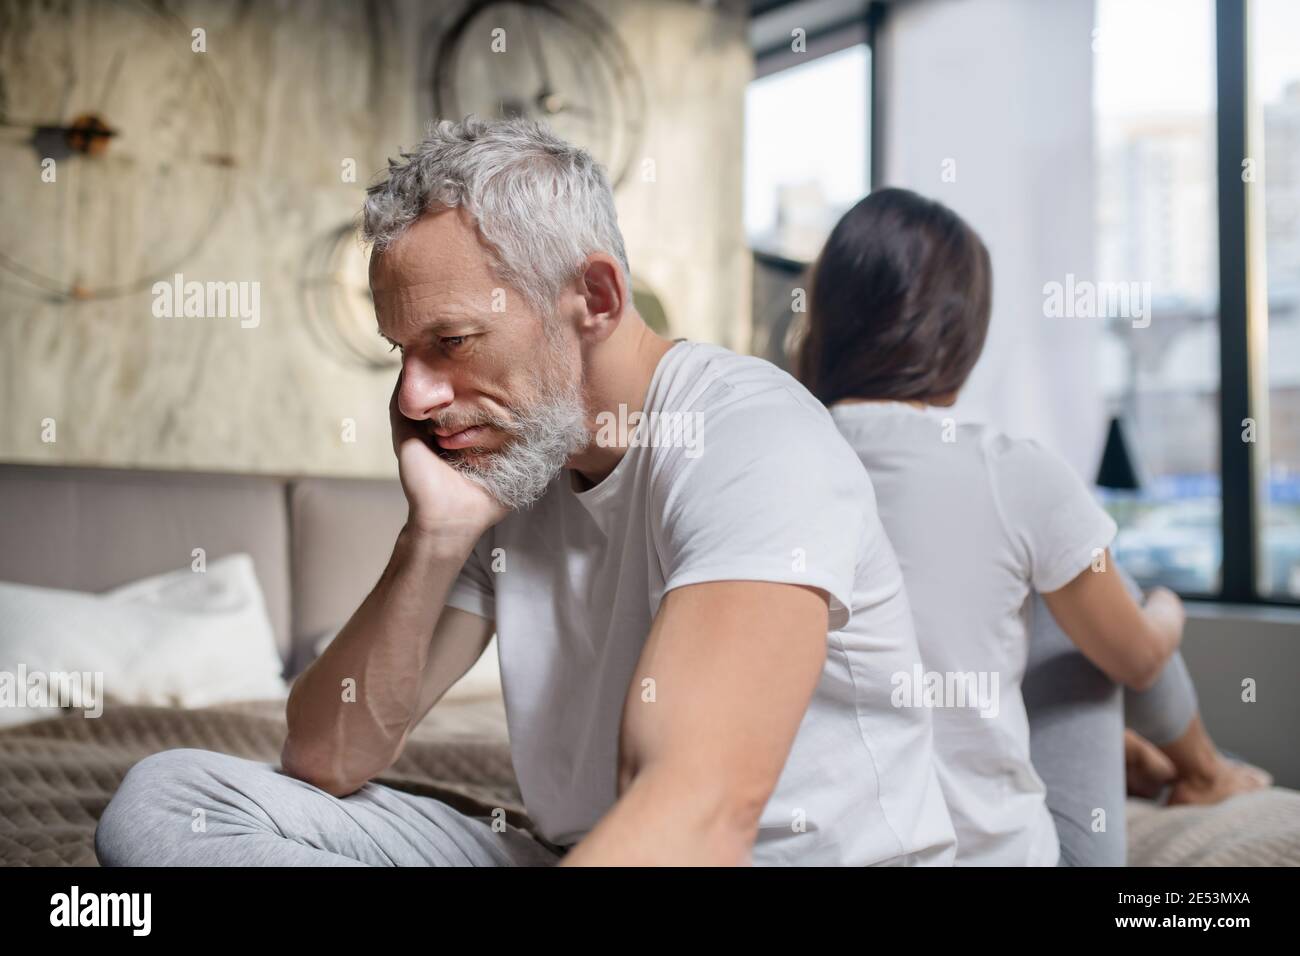 Unhappy man sitting back to back of woman Stock Photo